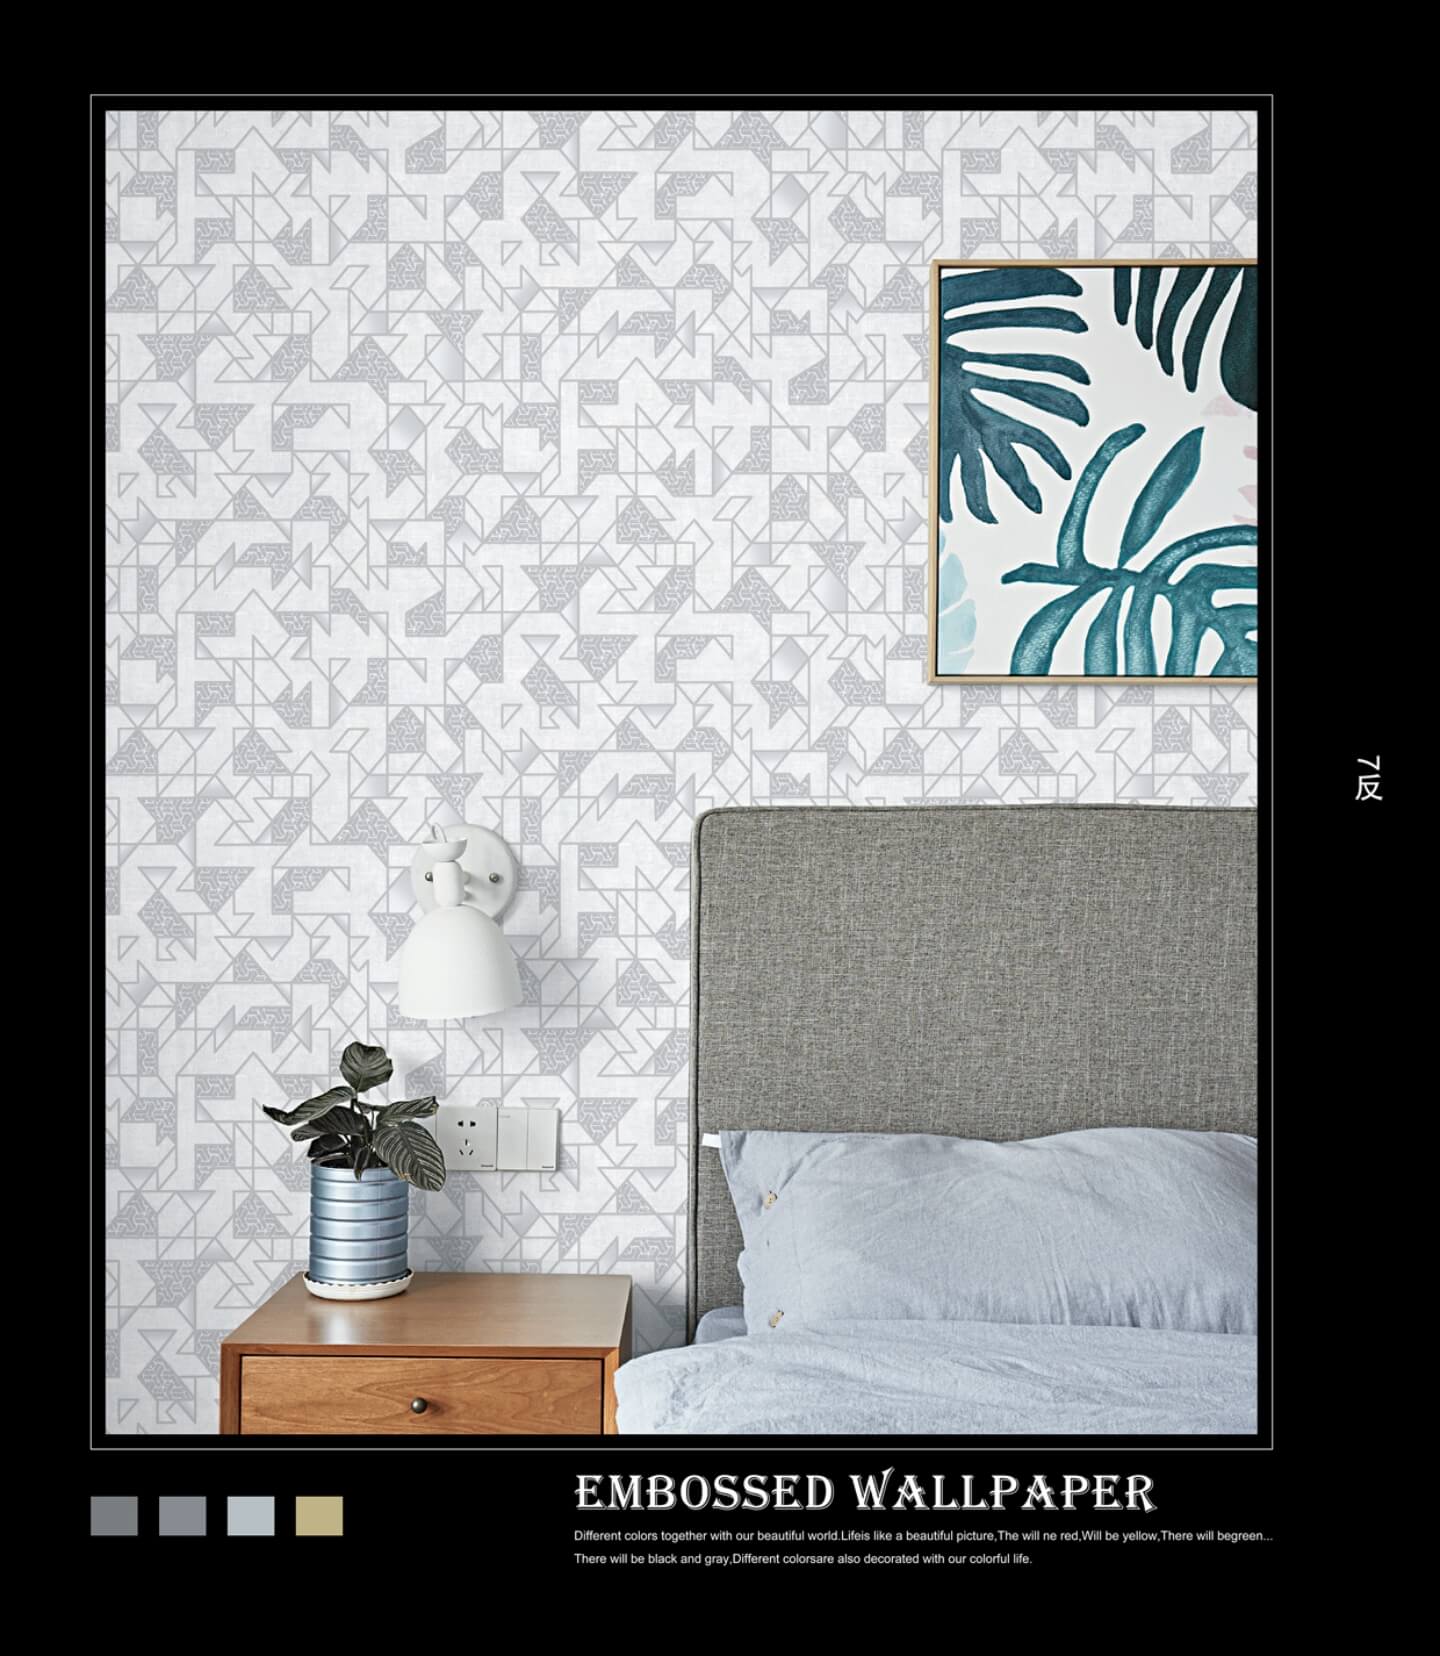 Multicolor Non-Adhesive 3D Designer Wallpaper Suitable For Bedroom, Living Room, Office, High-Quality PVC Water-resistant Wallpapers (11)